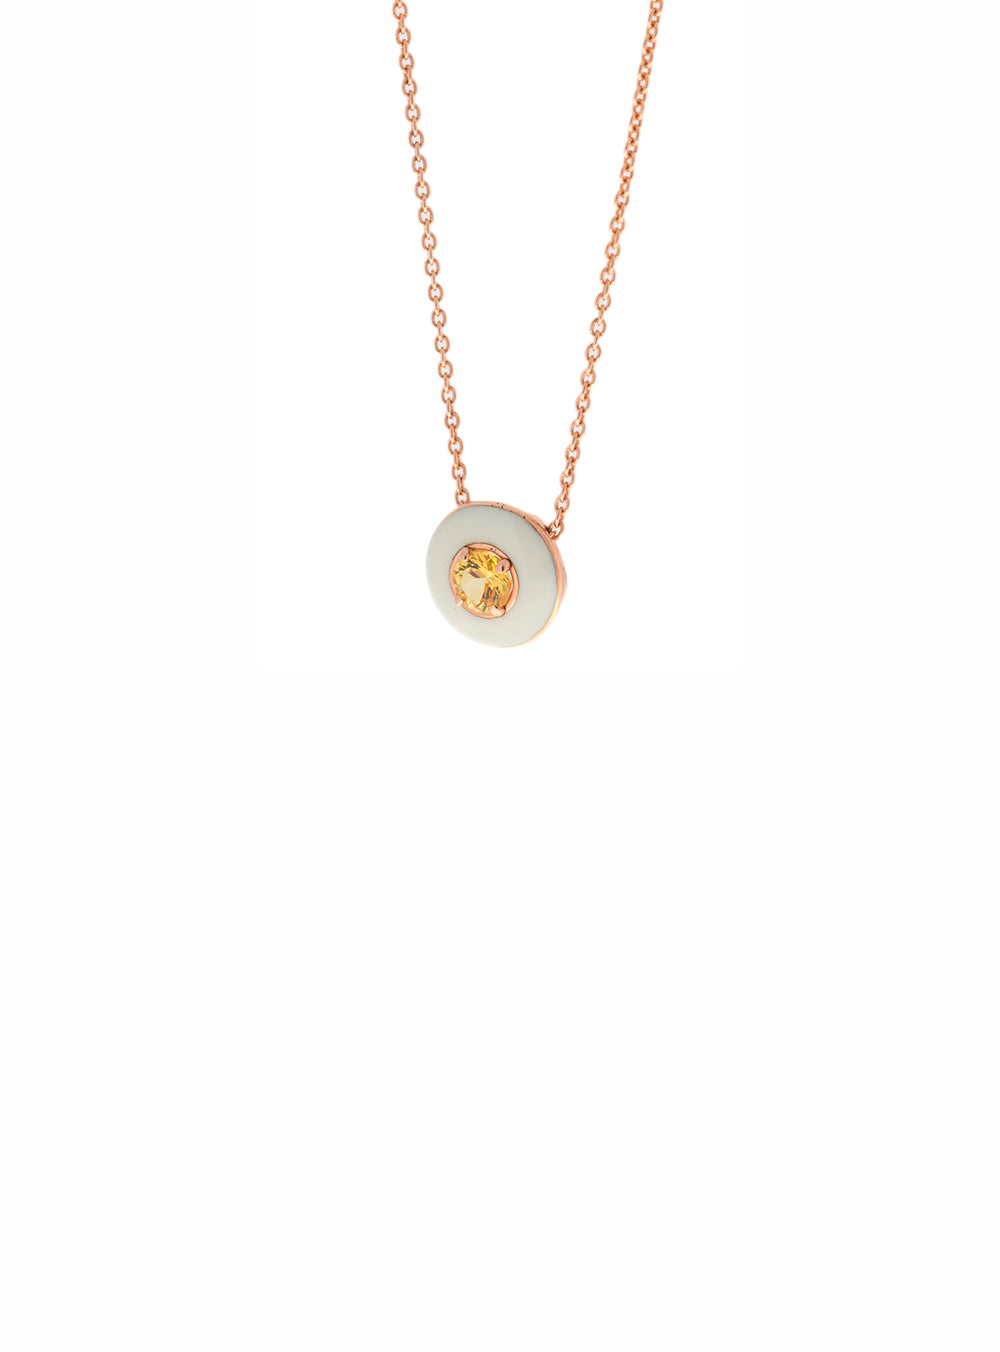 ROSE GOLD NECKLACE ENAMEL & YELLOW SAPPHIRE